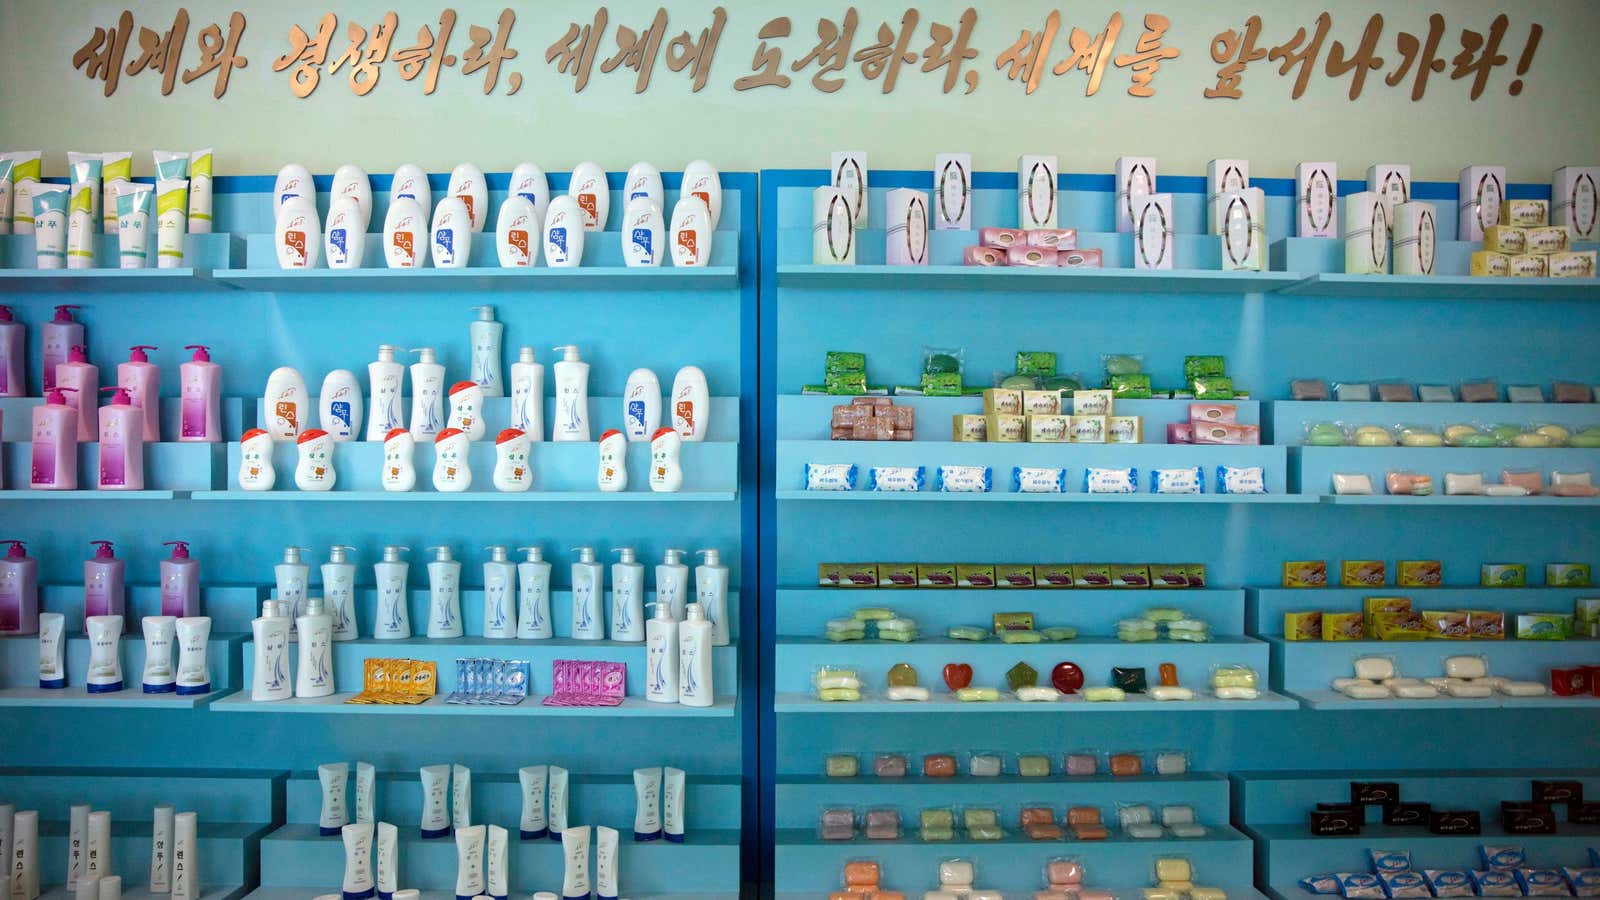 A slogan in Pyongyang Cosmetics Factory reads: “Compete with the world, challenge the world, go lead the world!”